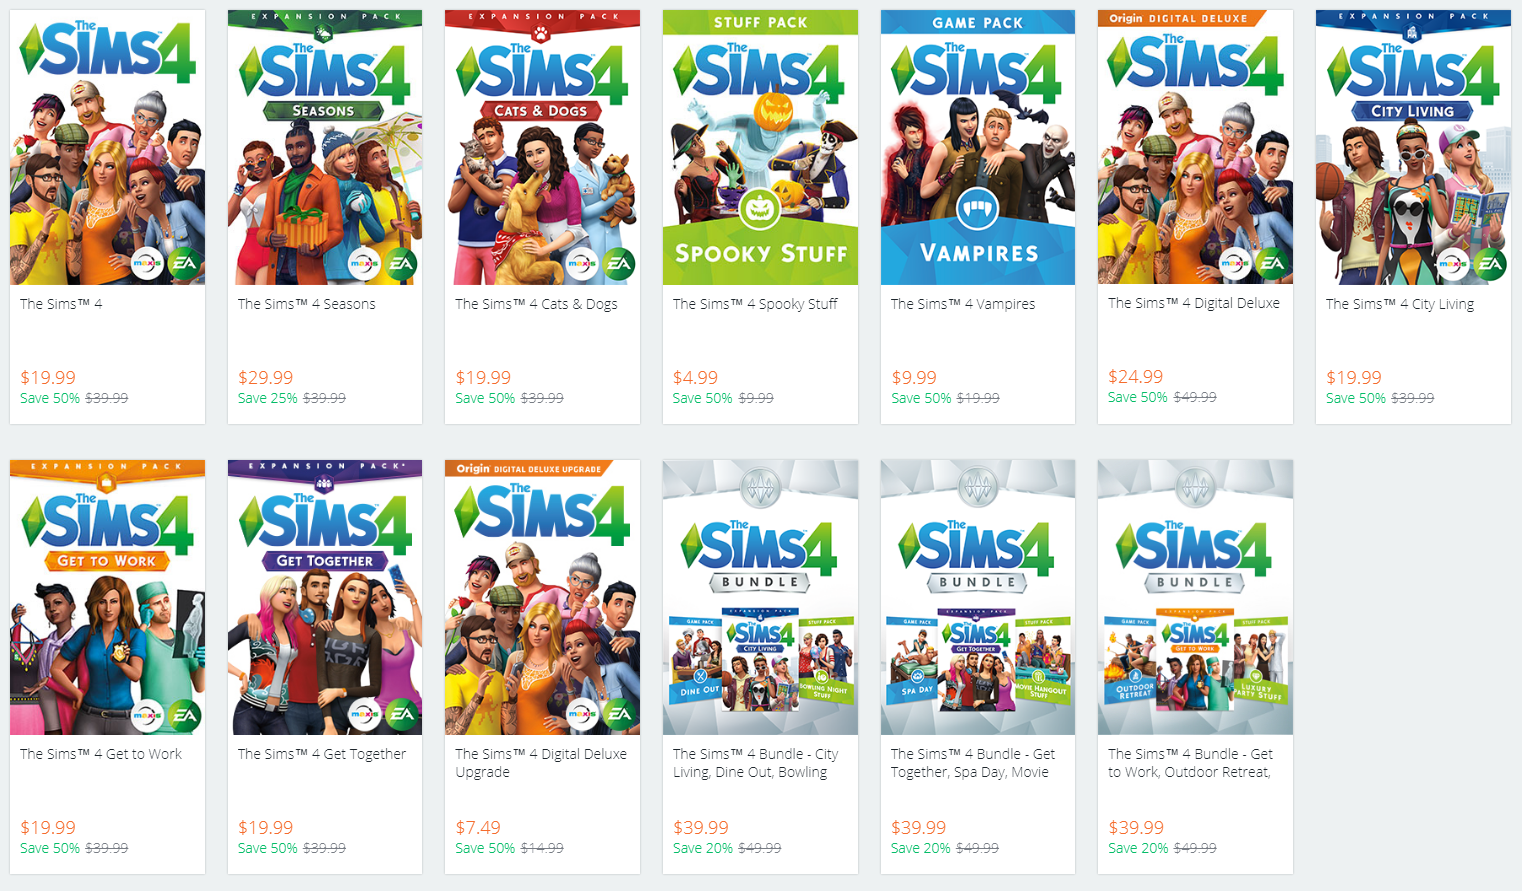 The Sims 4 Expansoes Origin